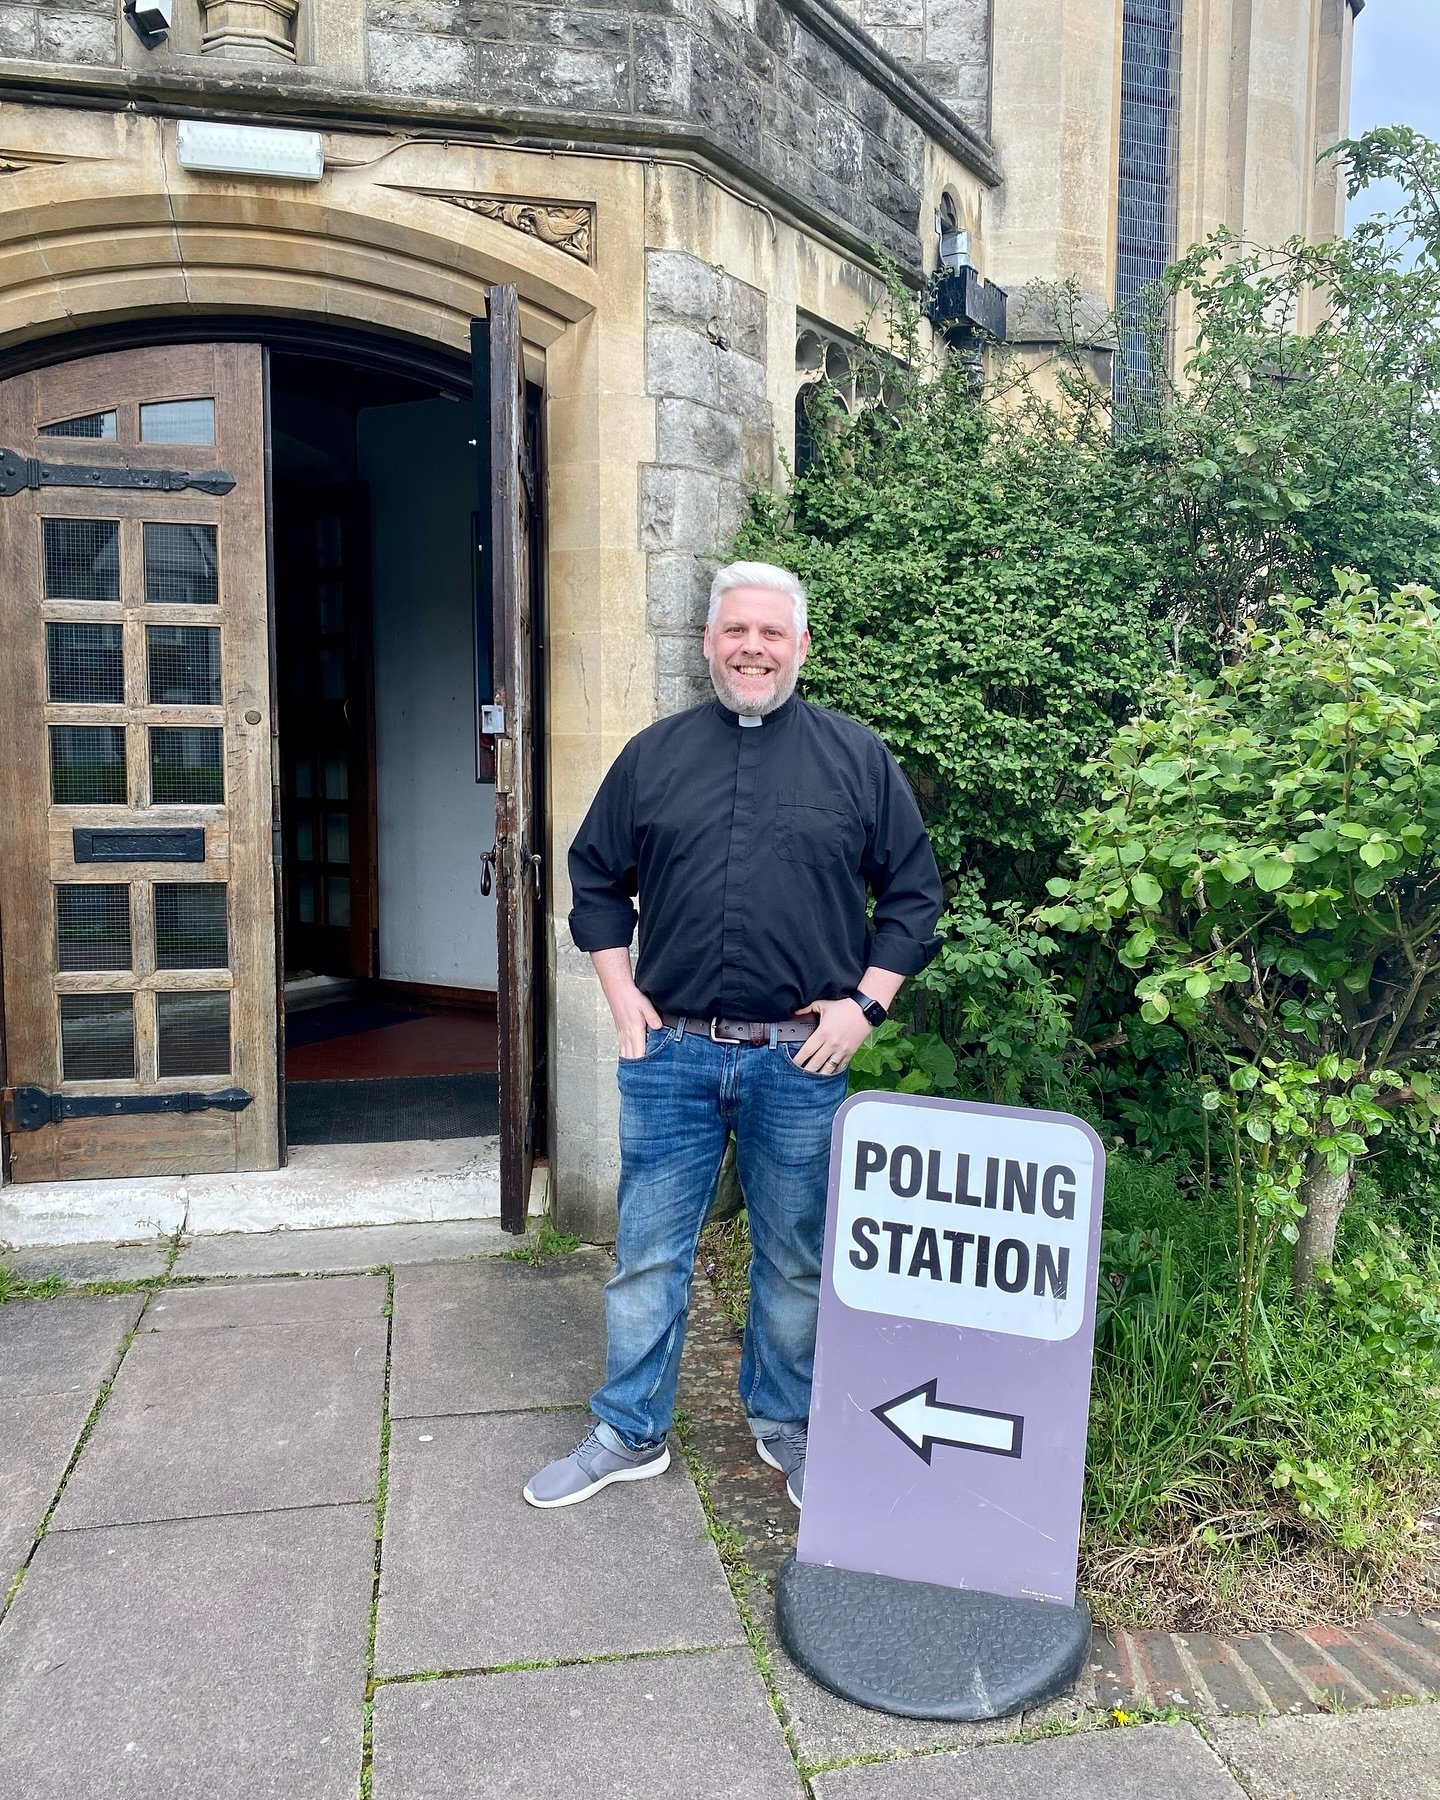 We are excited that tomorrow St. Peter&rsquo;s will be used and opened as a local Polling Station! We are looking forward to welcoming those from the community into our building ⛪️

See you tomorrow! 👋

#pollingstation #churchpollingstation #stpeter